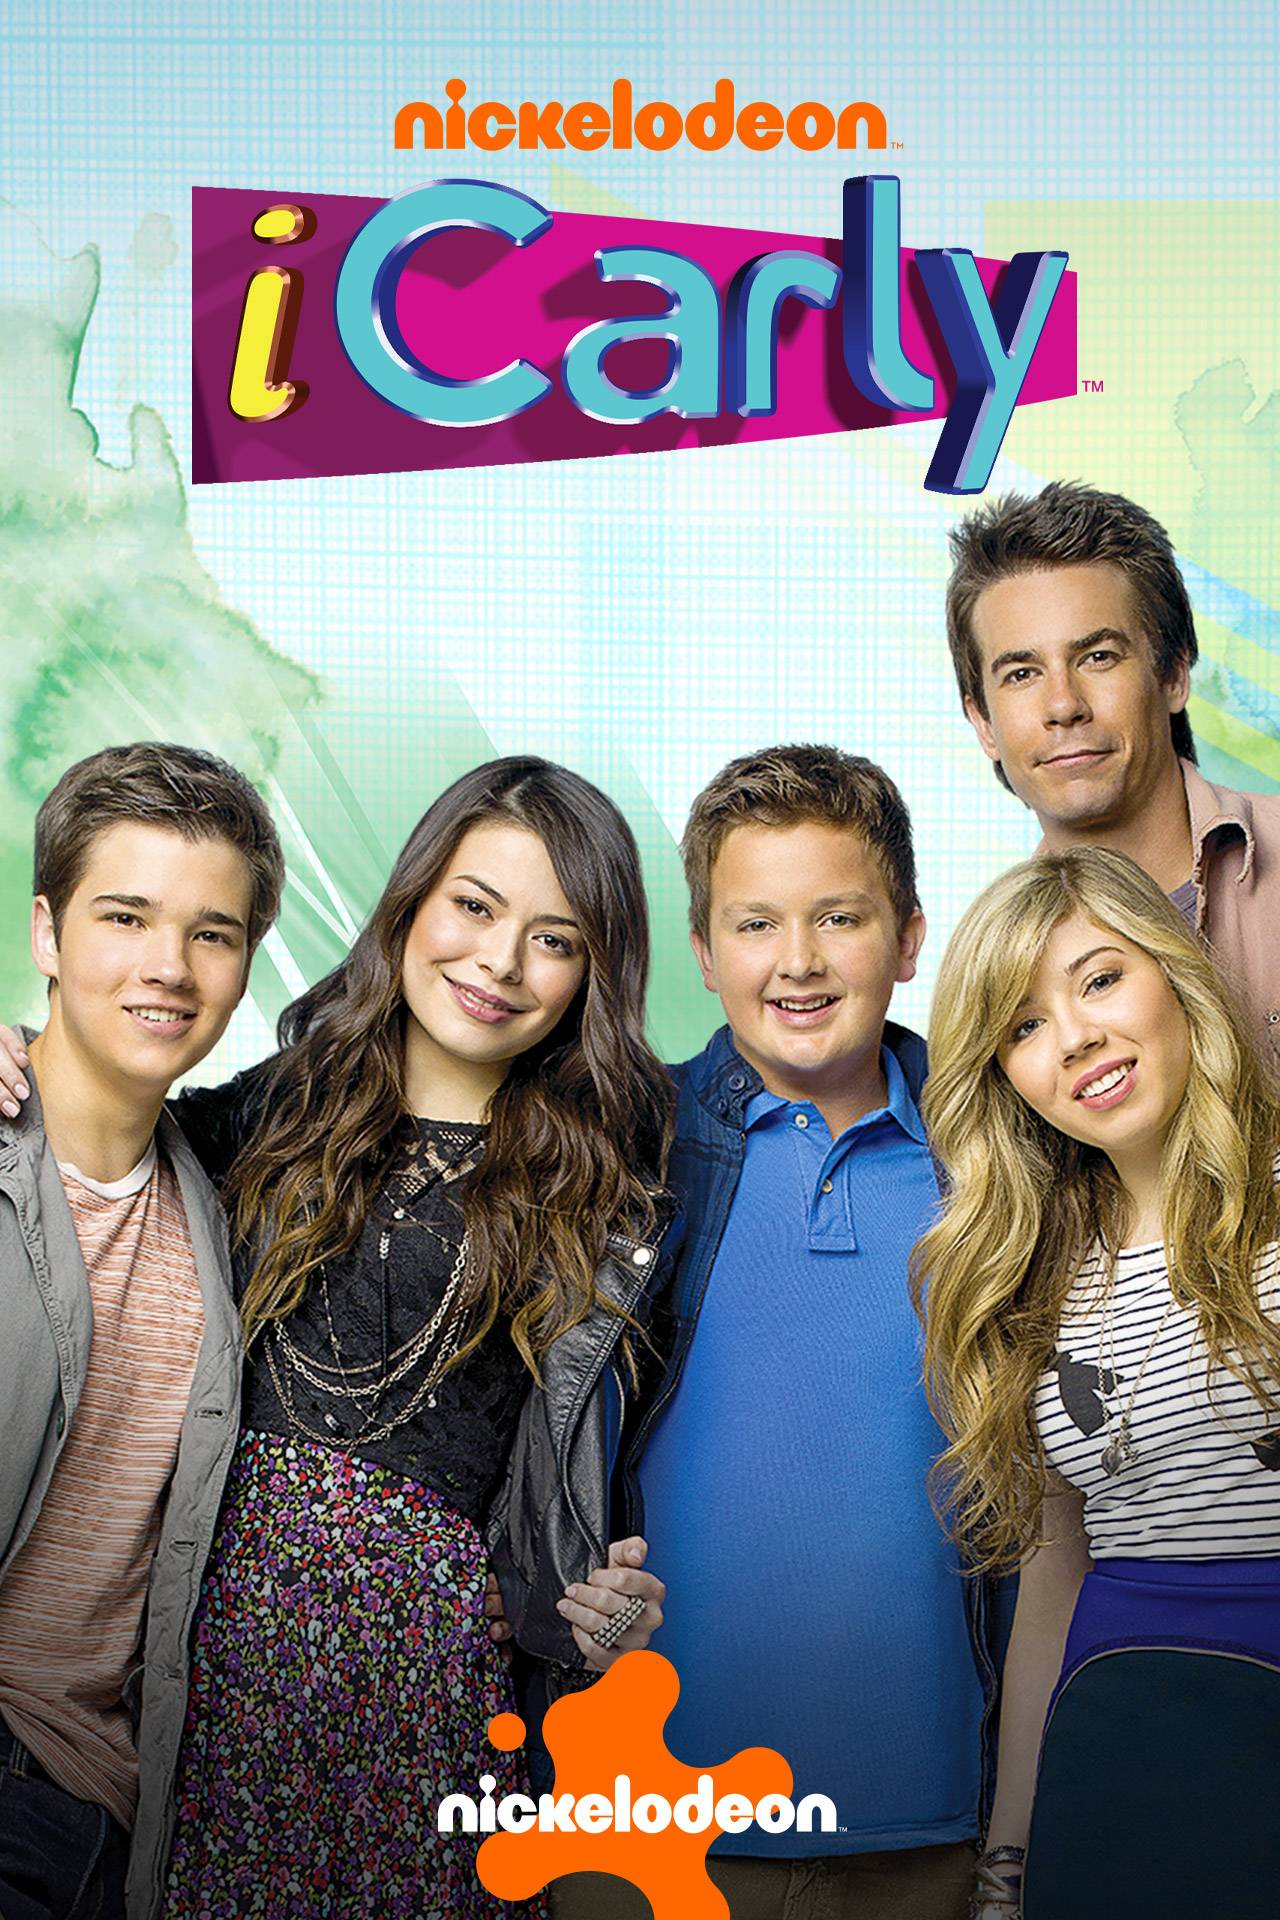 The 10 Best iCarly Episodes